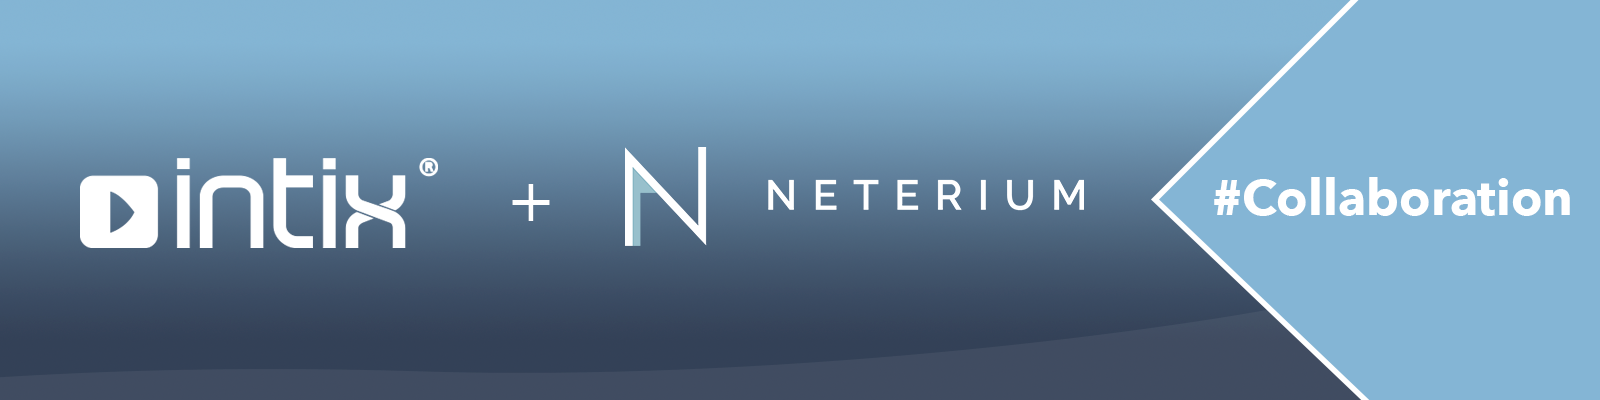 Intix and Neterium collaborate to streamline banks’ forensic investigations